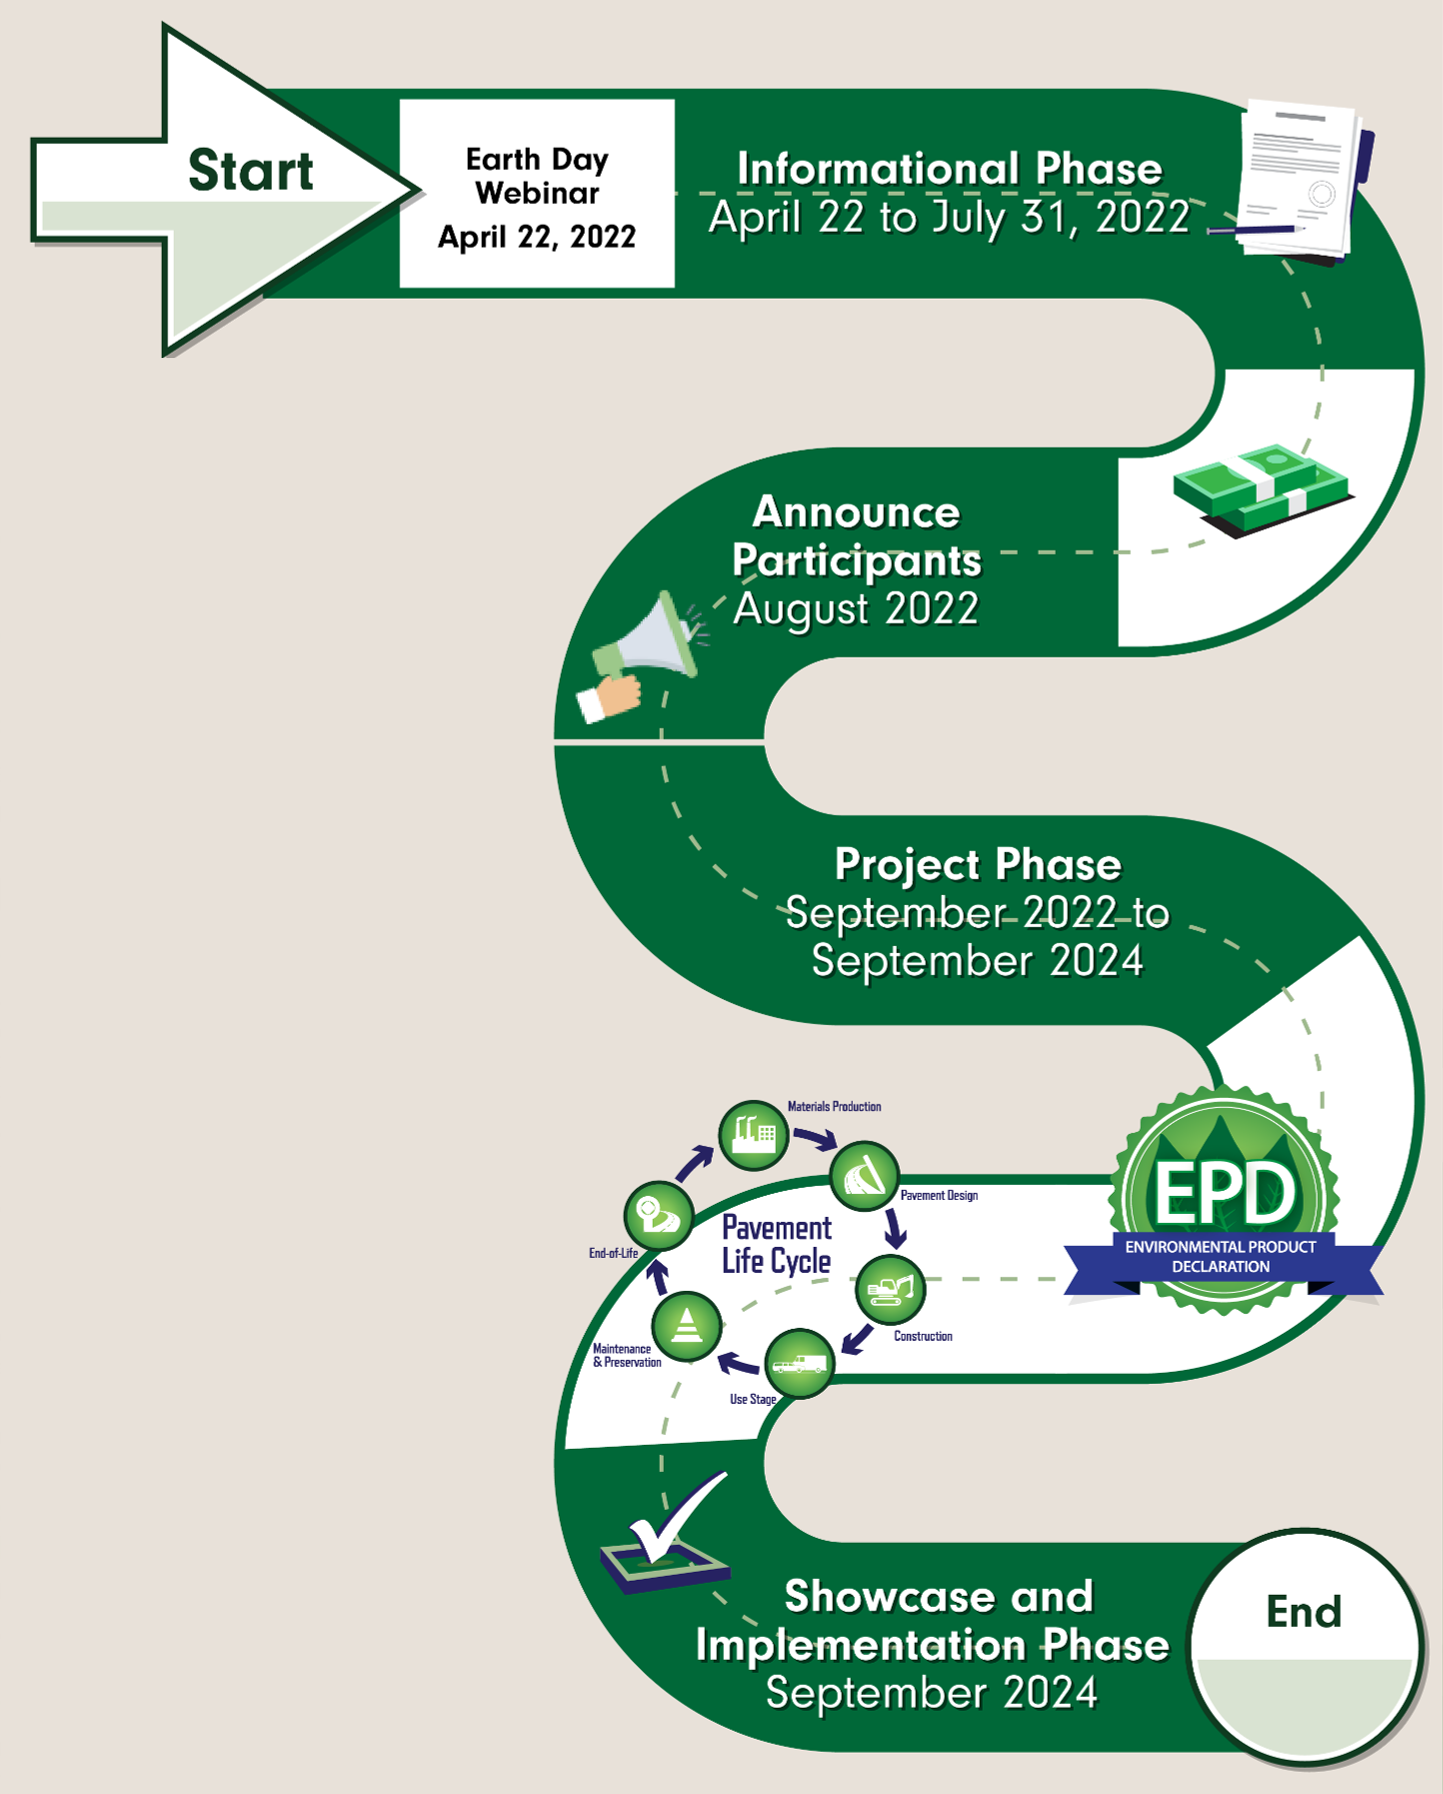 An infographic showing the phases of the FHWA Climate Challenge, laid out in a winding road and starting with the Earth Day Webinar on April 22, 2022.